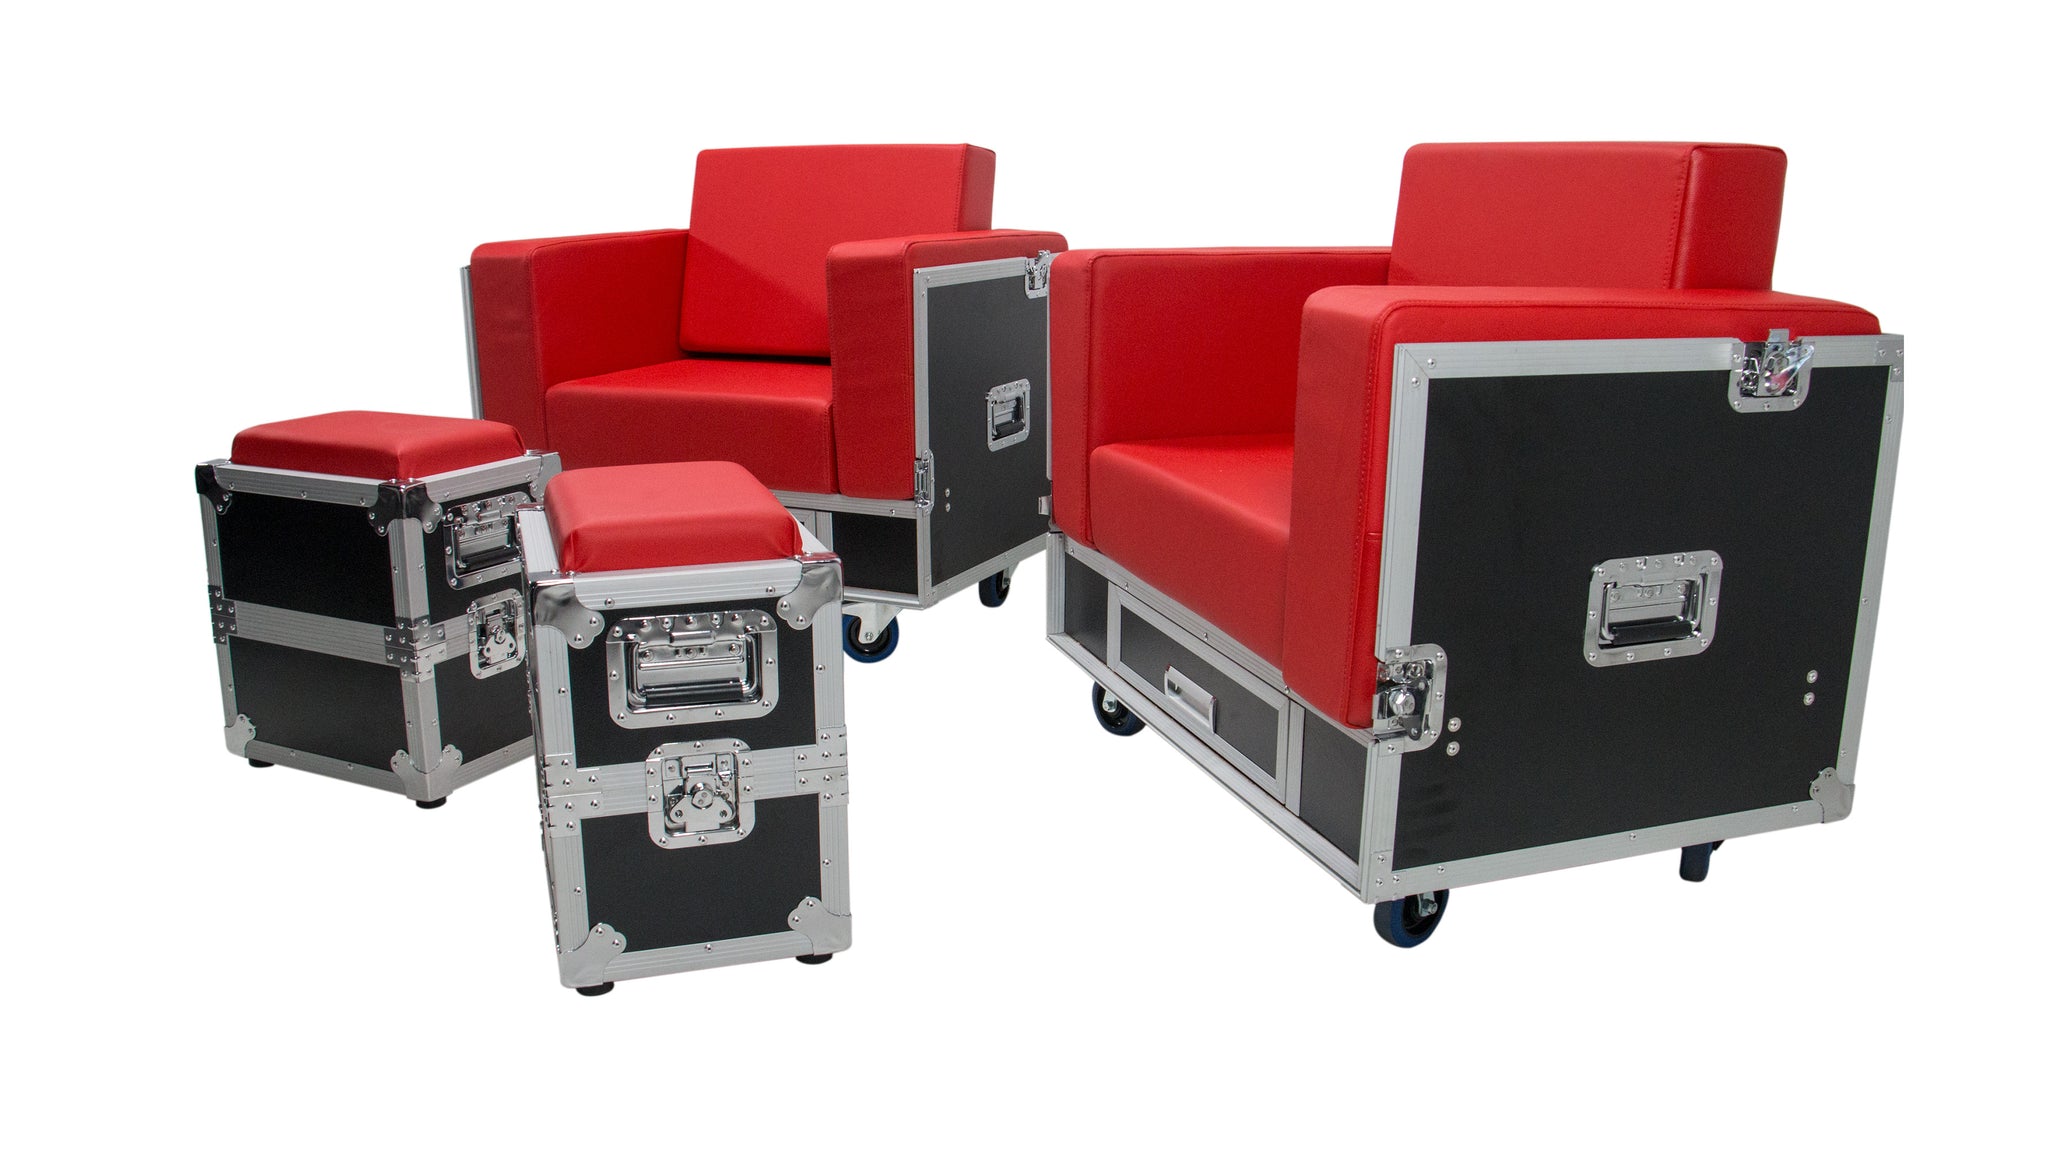 OSP ATA-GR-SET1-RED Green Room Furniture Set  - Black with Red Cushions